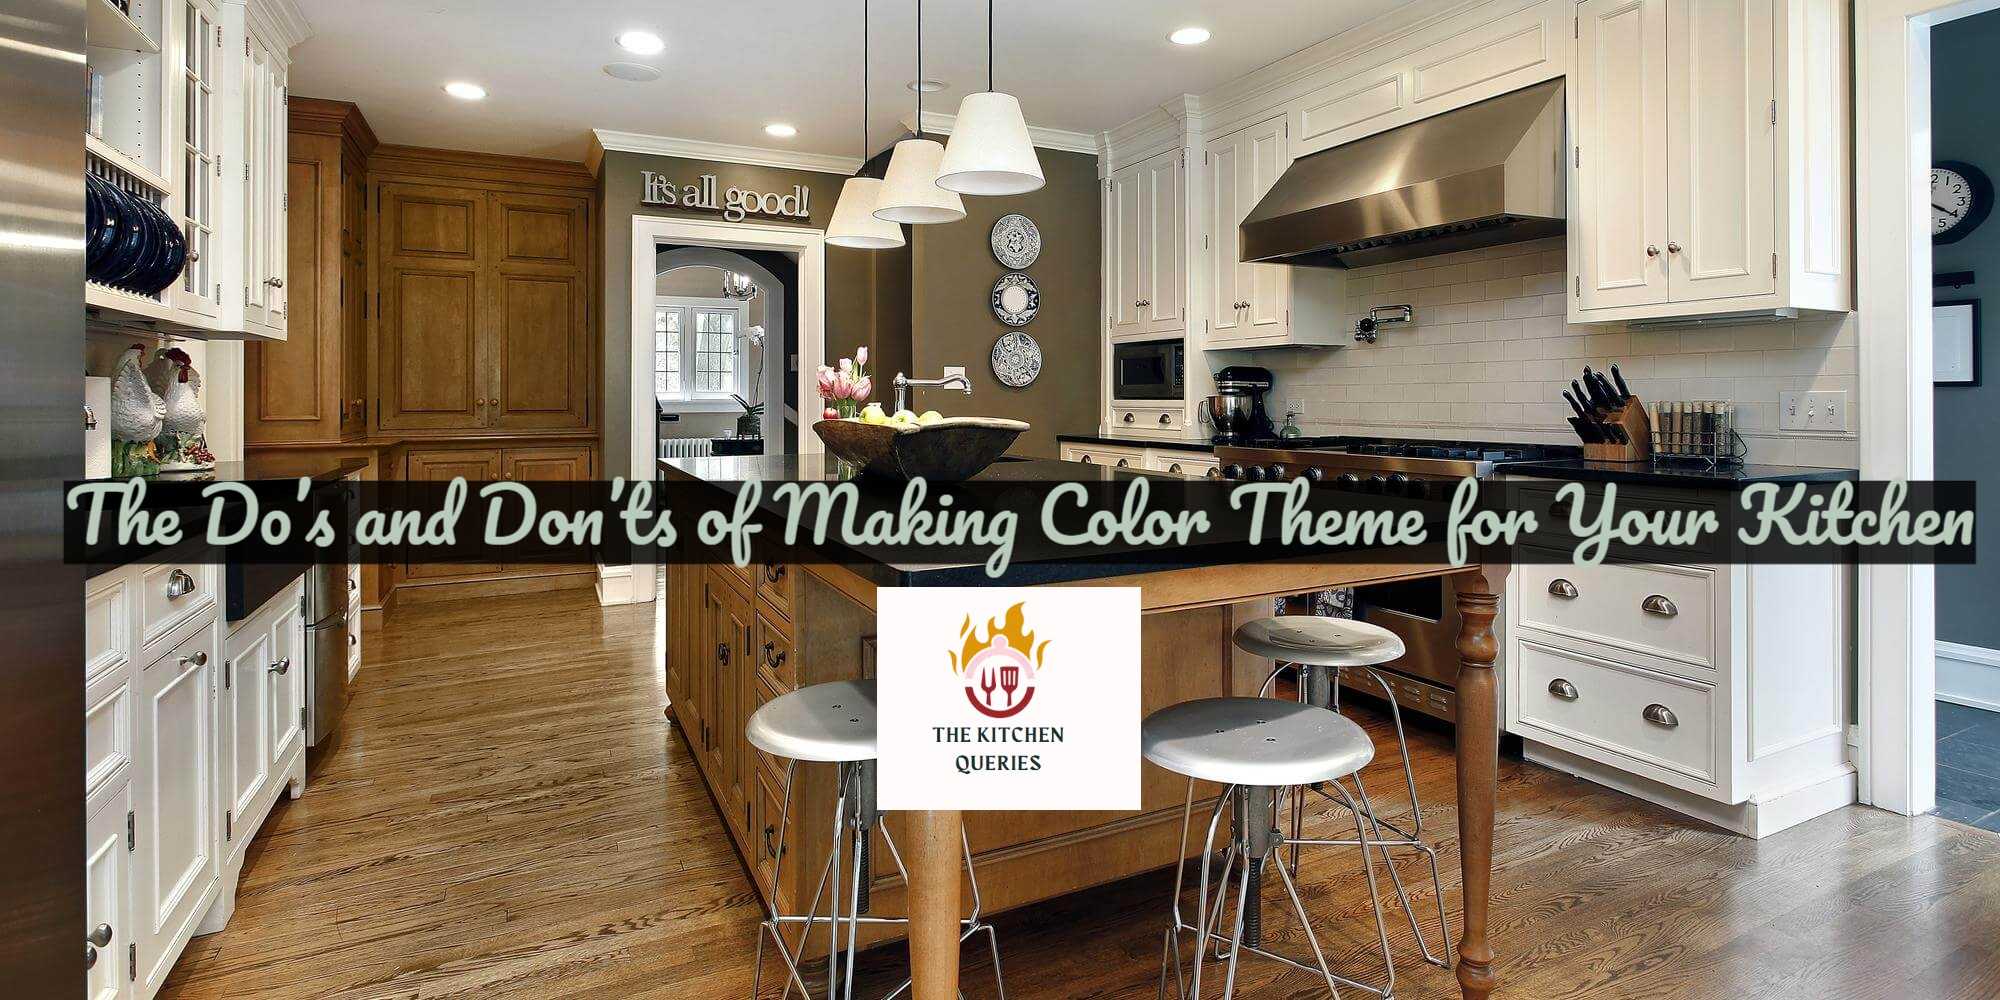 The Do’s and Don’ts of Matching Countertops to Cabinets